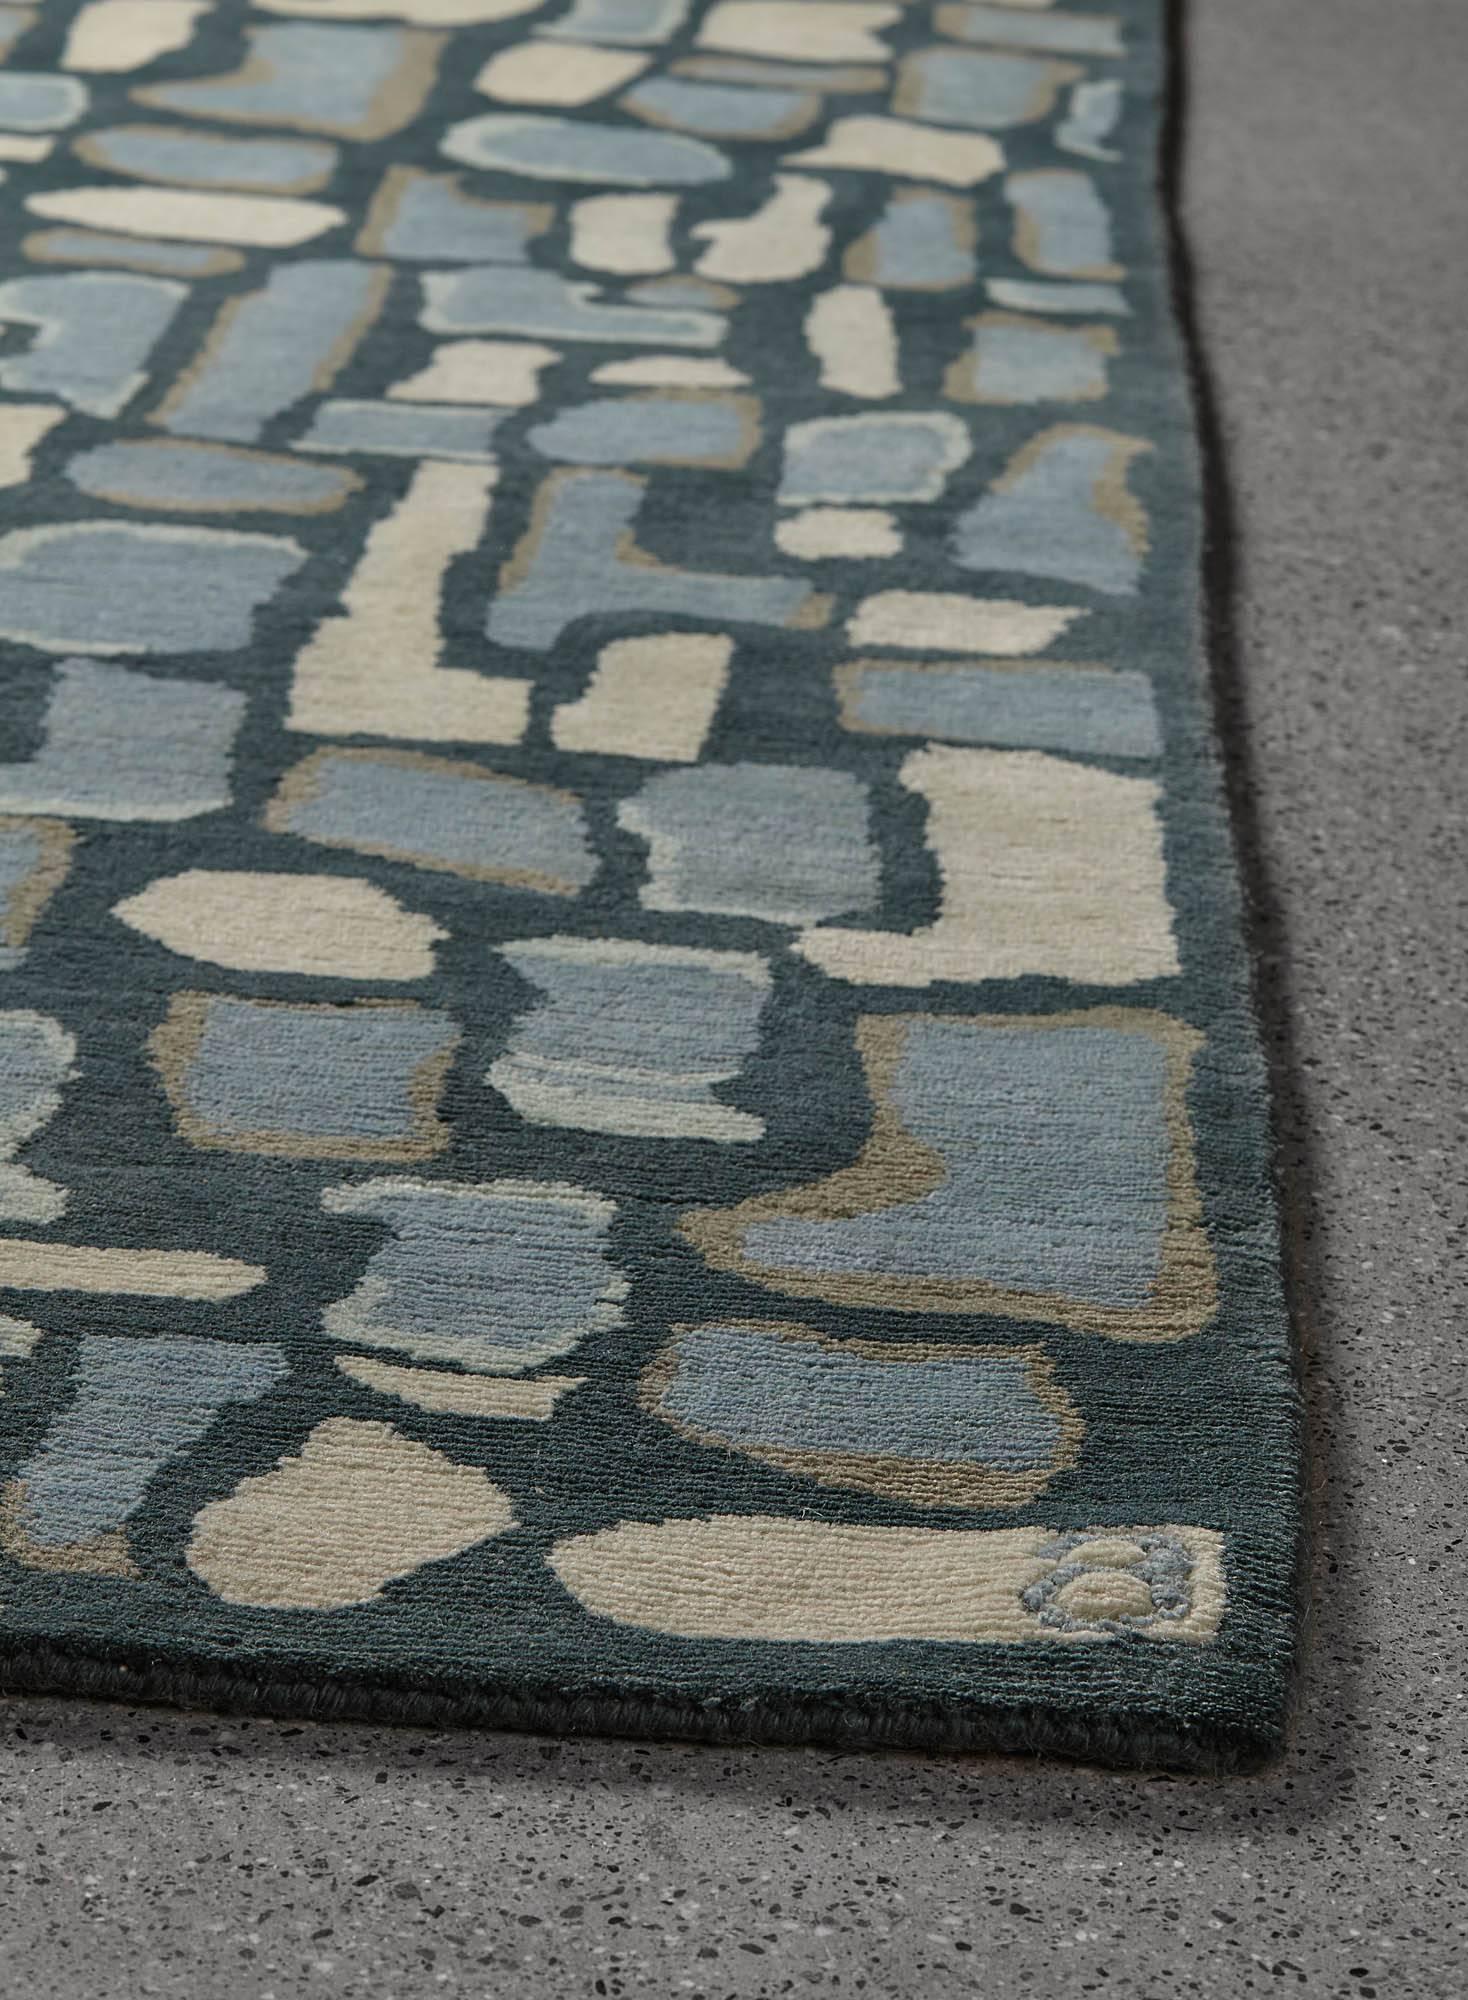 Composites of the simplest elements make up some of the greatest wonders of the natural world. The Pyrite / Toopaz area rug from Angela Adams combines simple, colorful, organic shapes in blue and grey to create a textural landscape. Hand-knotted